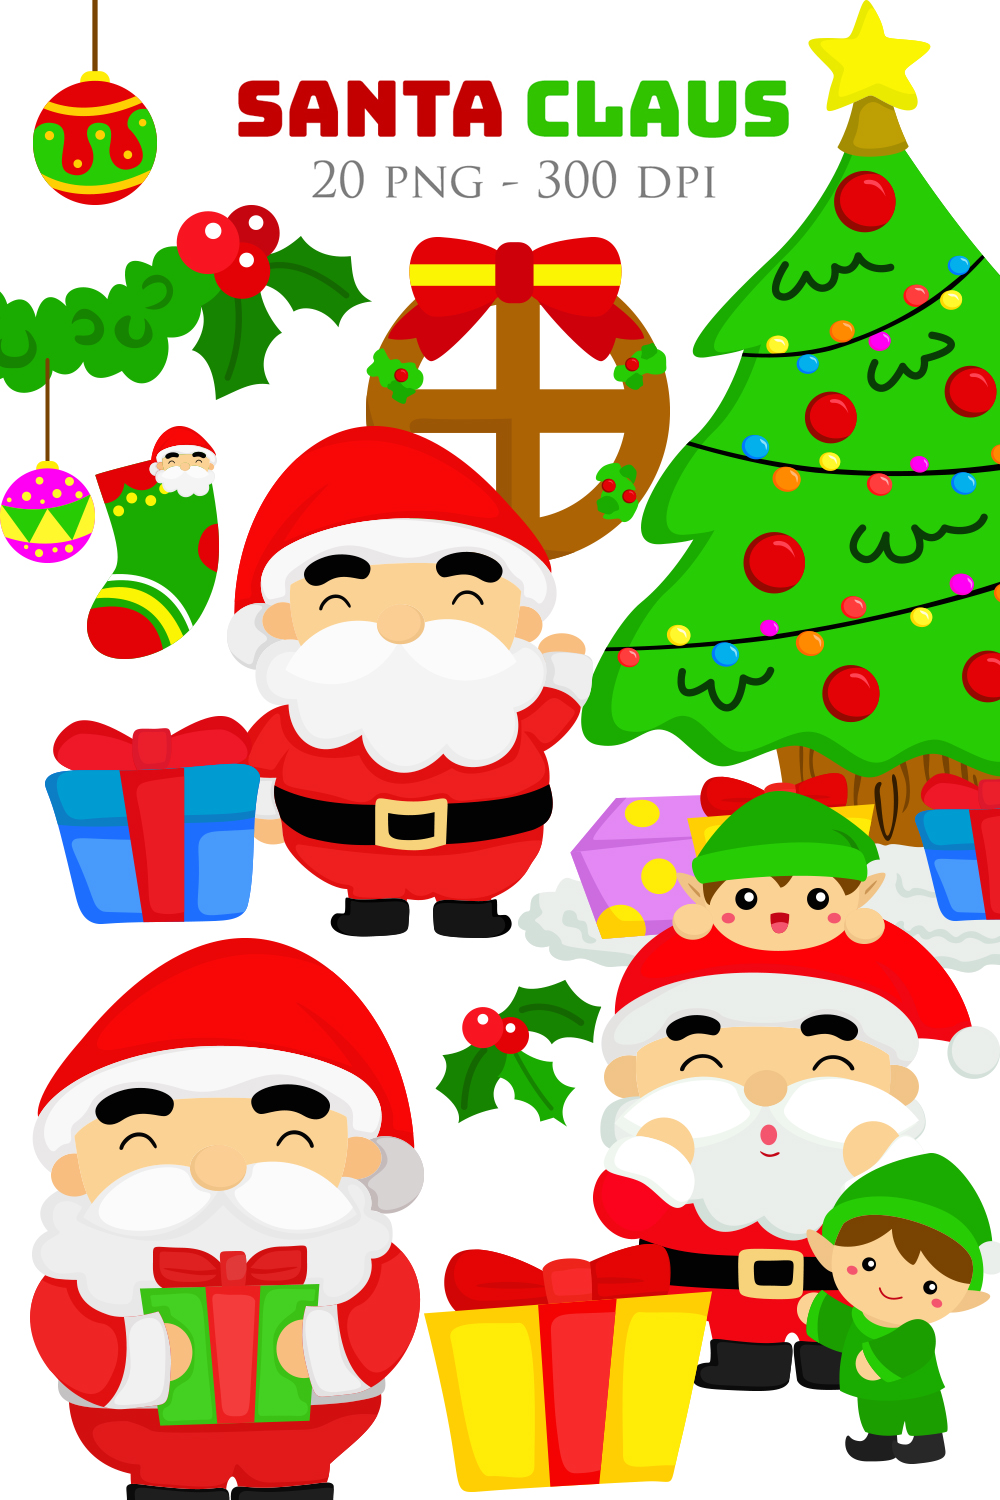 Cute Colorful Santa Claus Christmas and Kids Elf and Tree Decoration Background Party Holiday Cartoon Illustration Vector Clipart Sticker pinterest preview image.